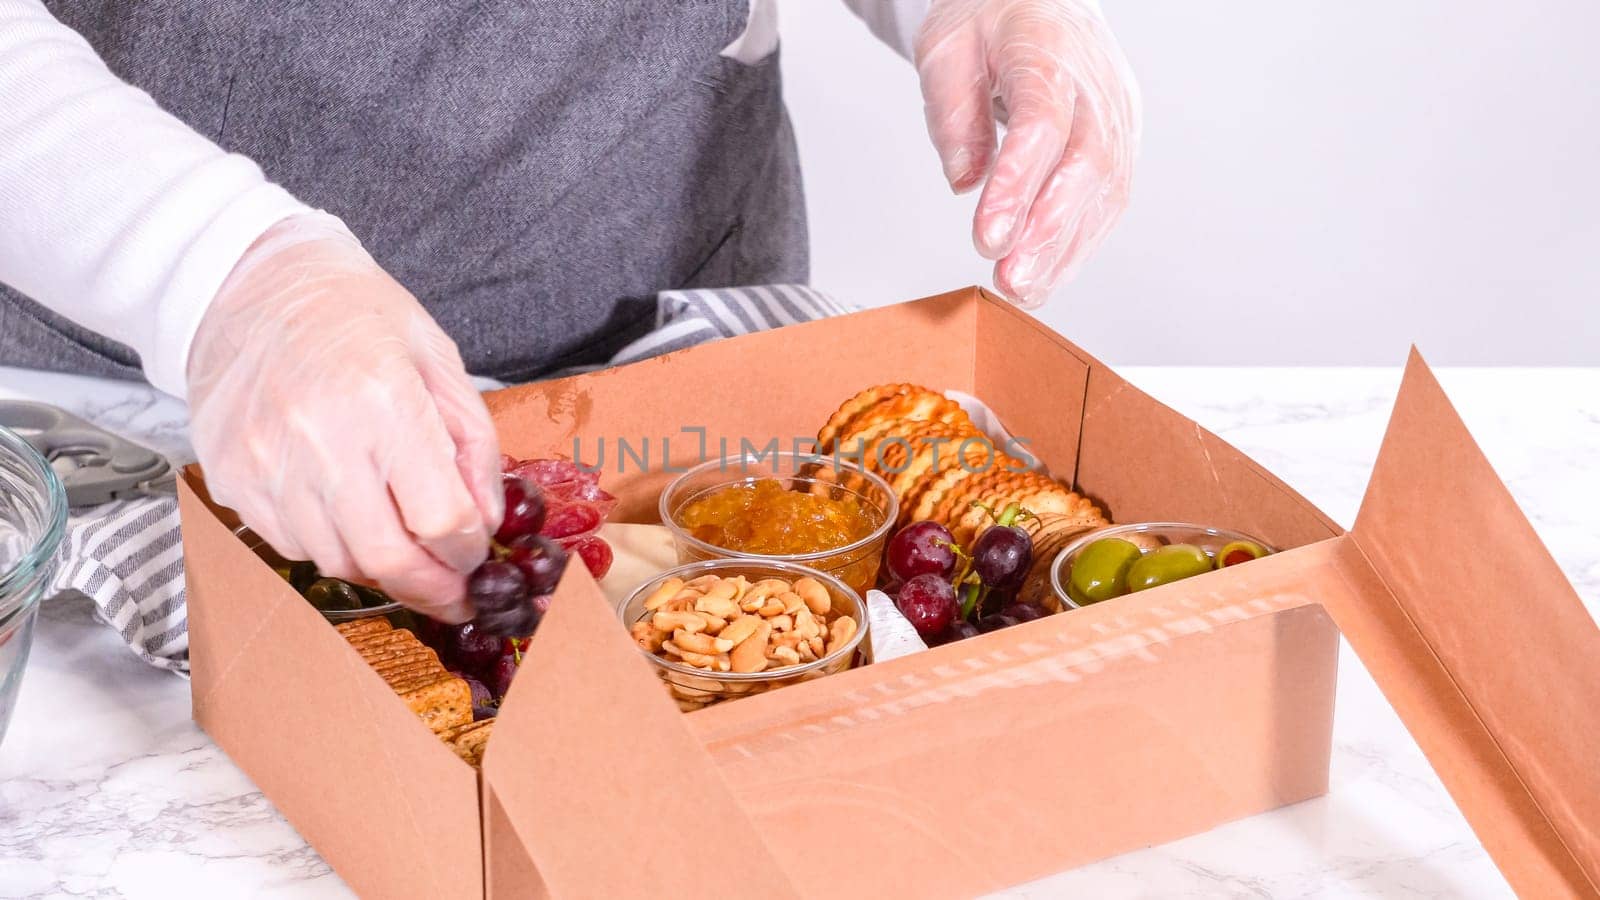 Hands are meticulously adding fresh red grapes to a bowl, complementing a beautifully arranged charcuterie box brimming with a variety of cheeses, olives, and cured meats, set against a sleek marble surface.